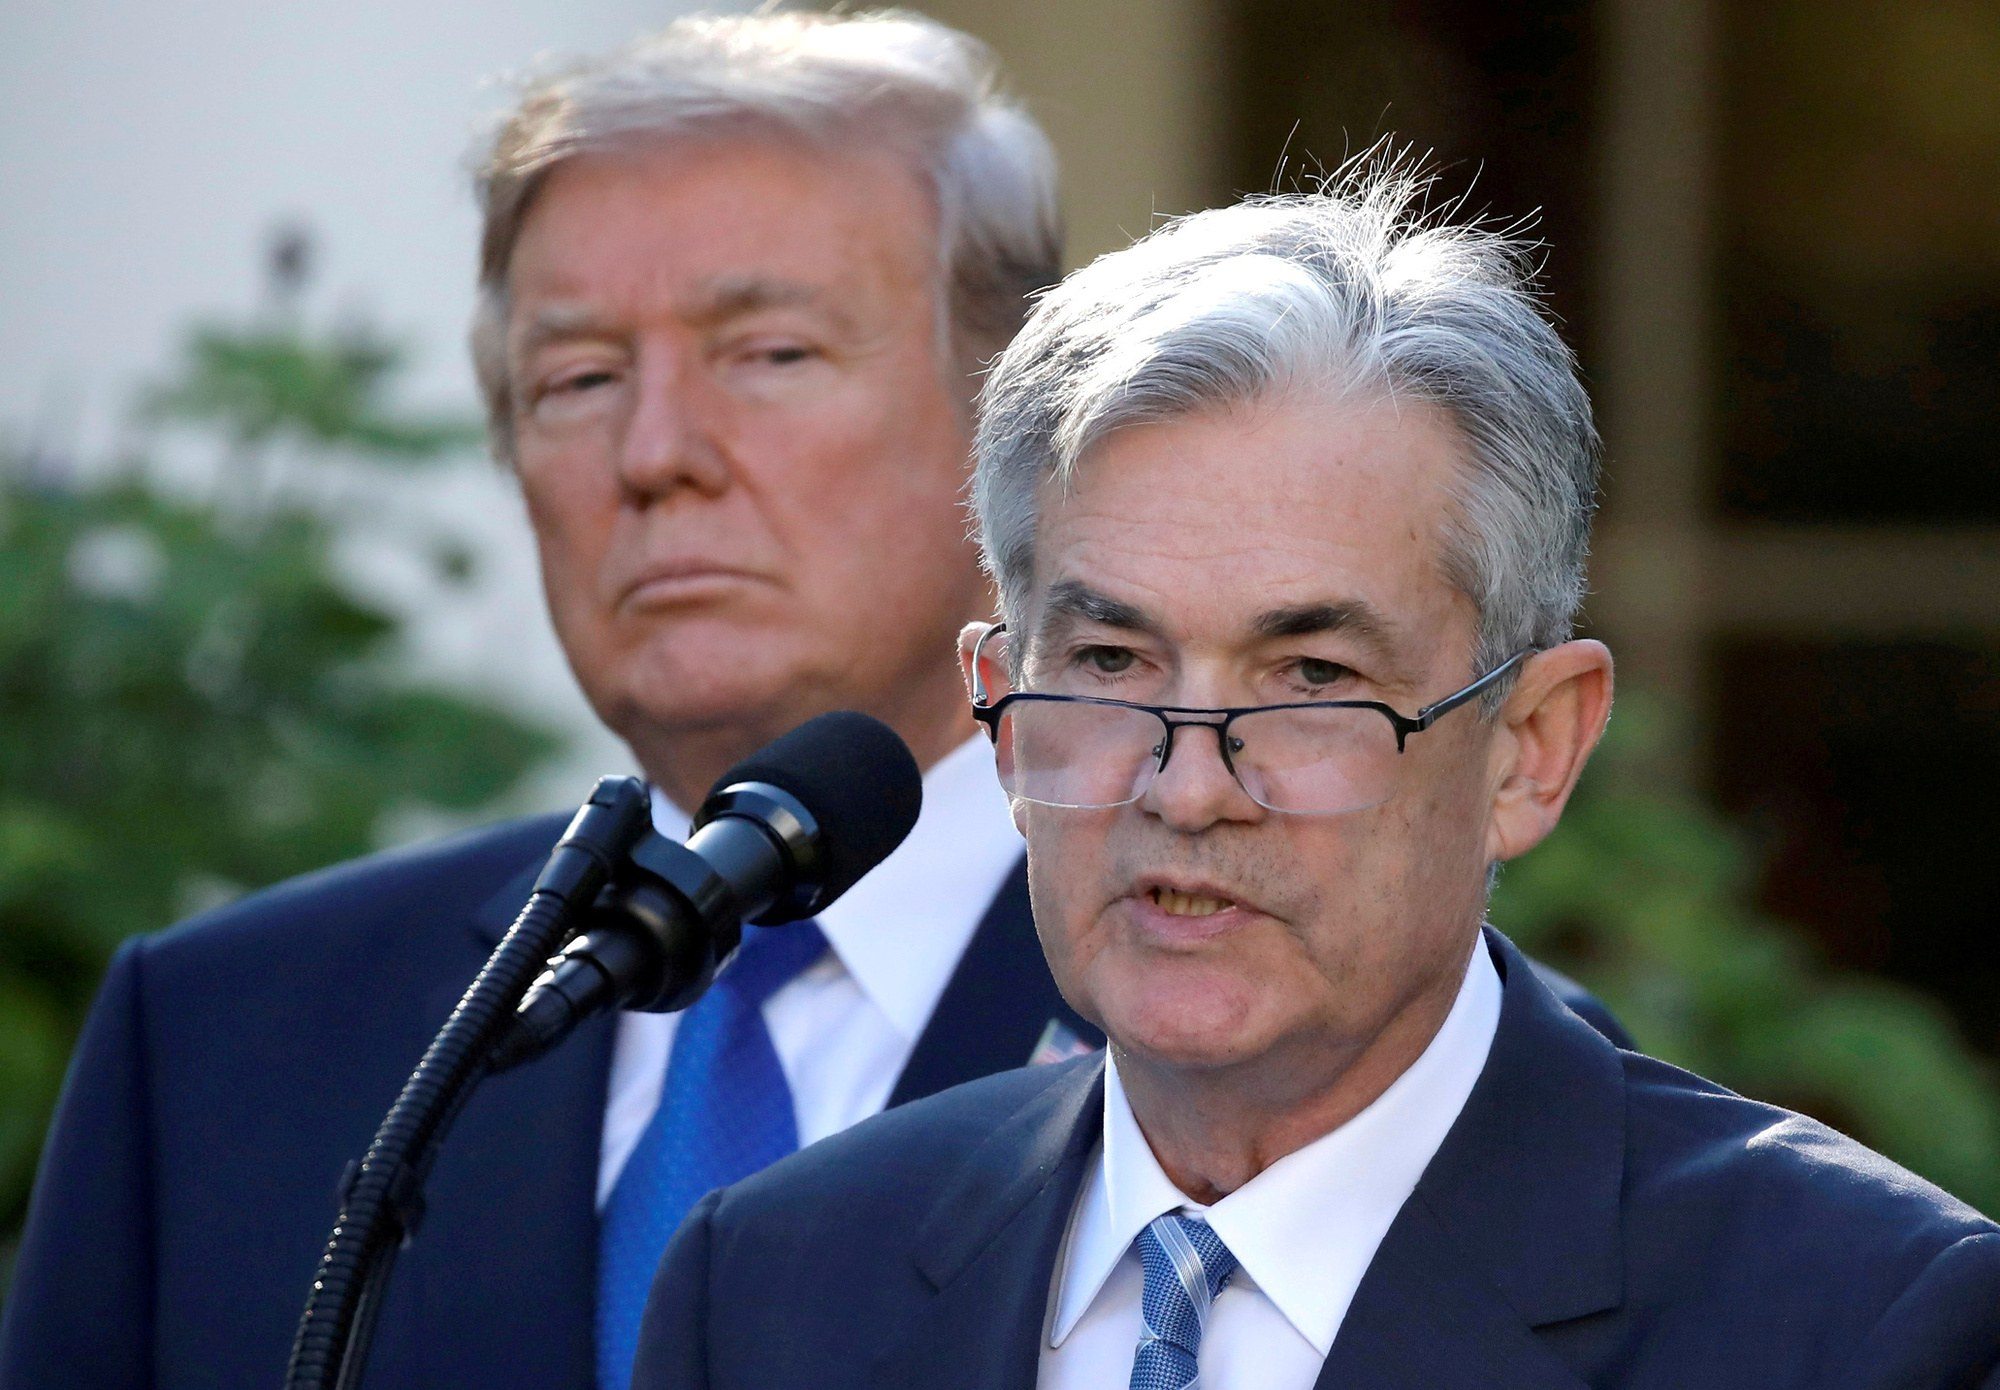 powell and trump